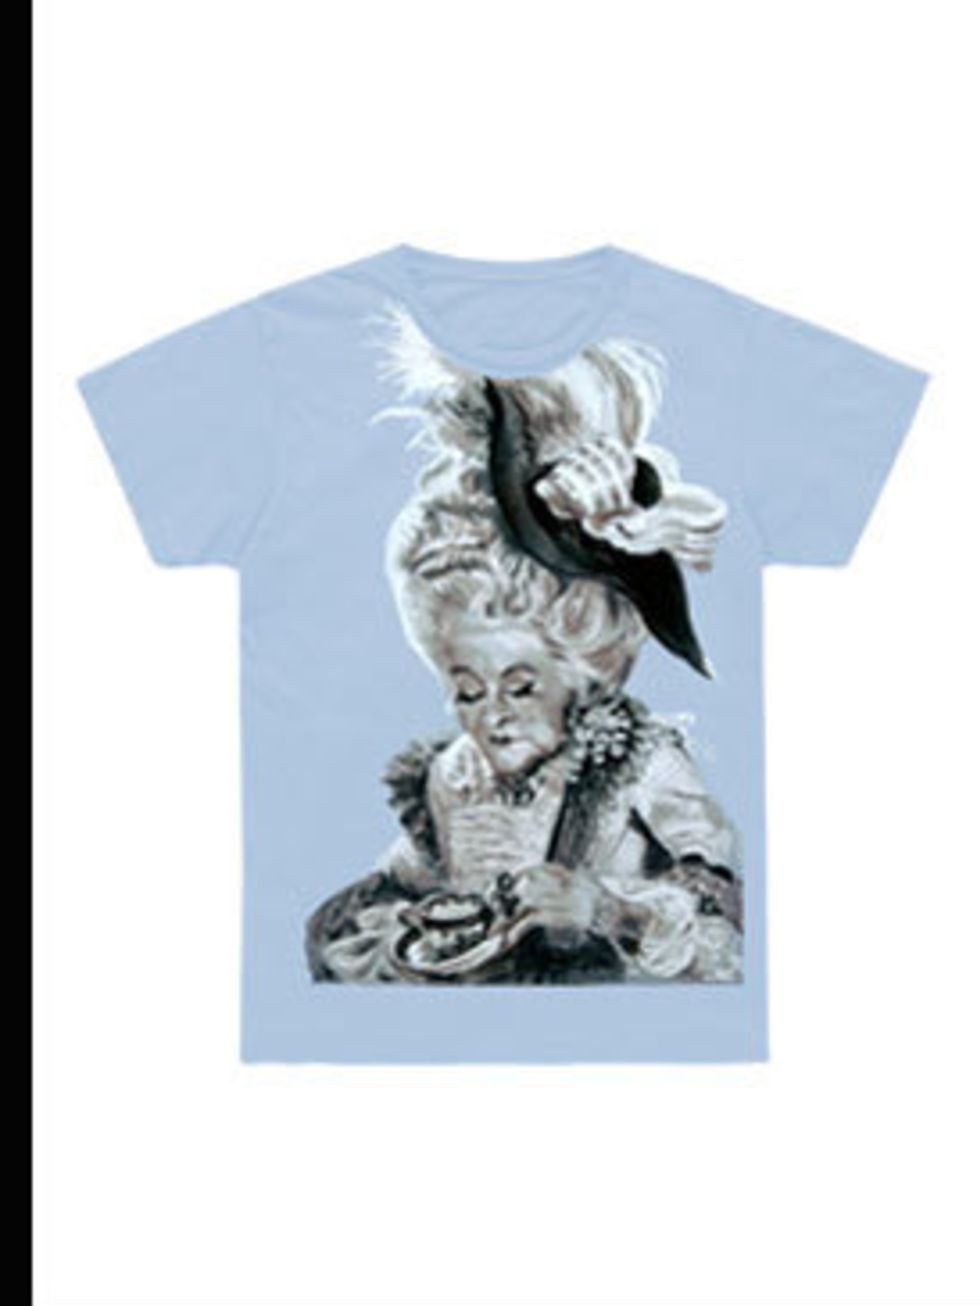 <p>Marie Antoinette T-shirt, £20 from Marc Jacobs, for stockists call 020 7907 2515</p>